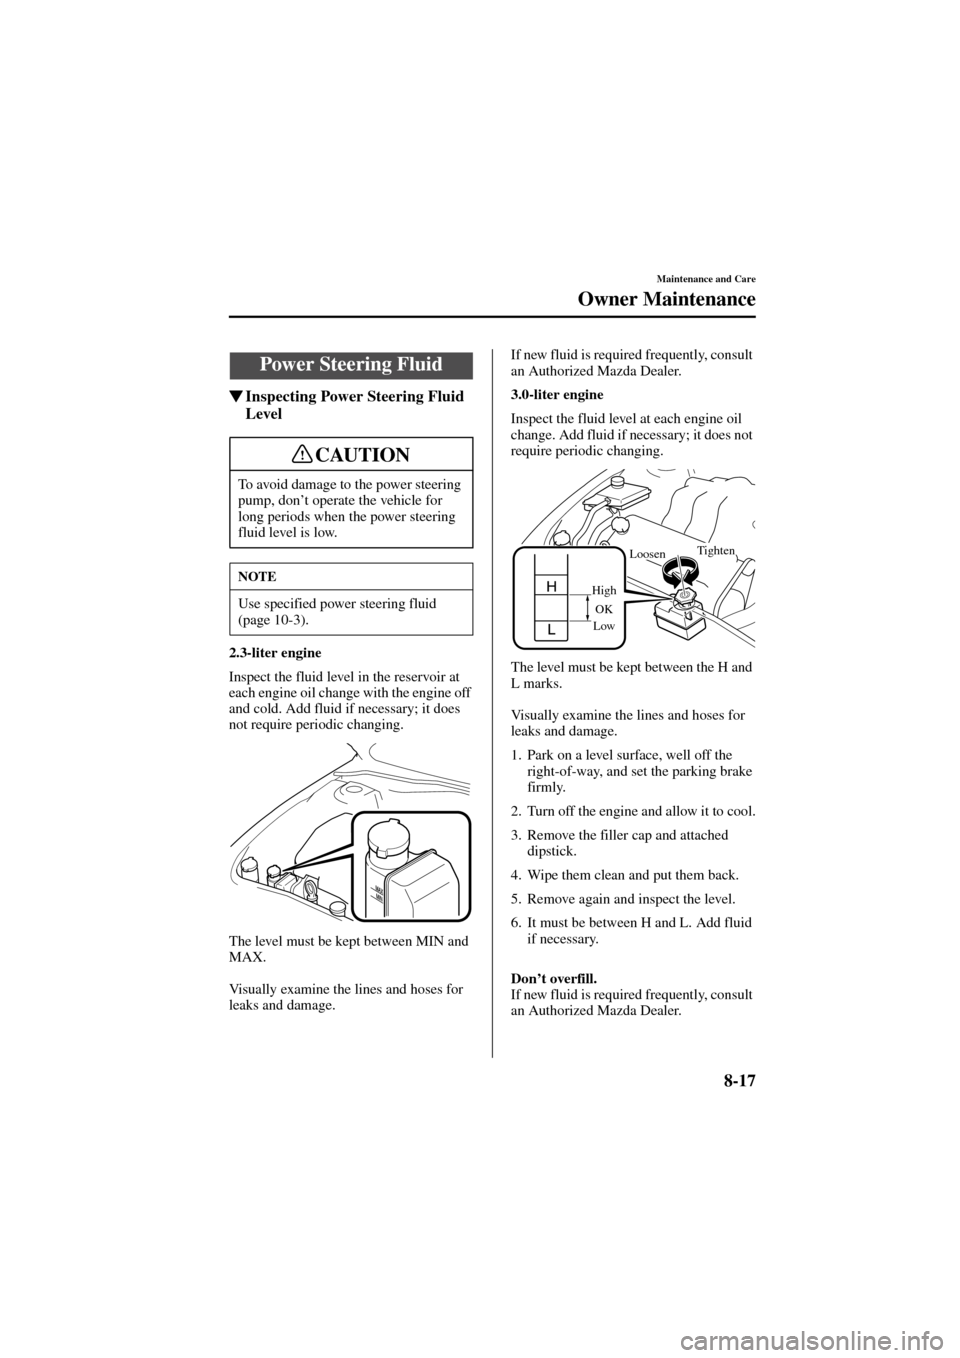 MAZDA MODEL 6 2004   (in English) User Guide 8-17
Maintenance and Care
Owner Maintenance
Form No. 8R29-EA-02I
Inspecting Power Steering Fluid 
Level
2.3-liter engine
Inspect the fluid level in the reservoir at 
each engine oil change with the e